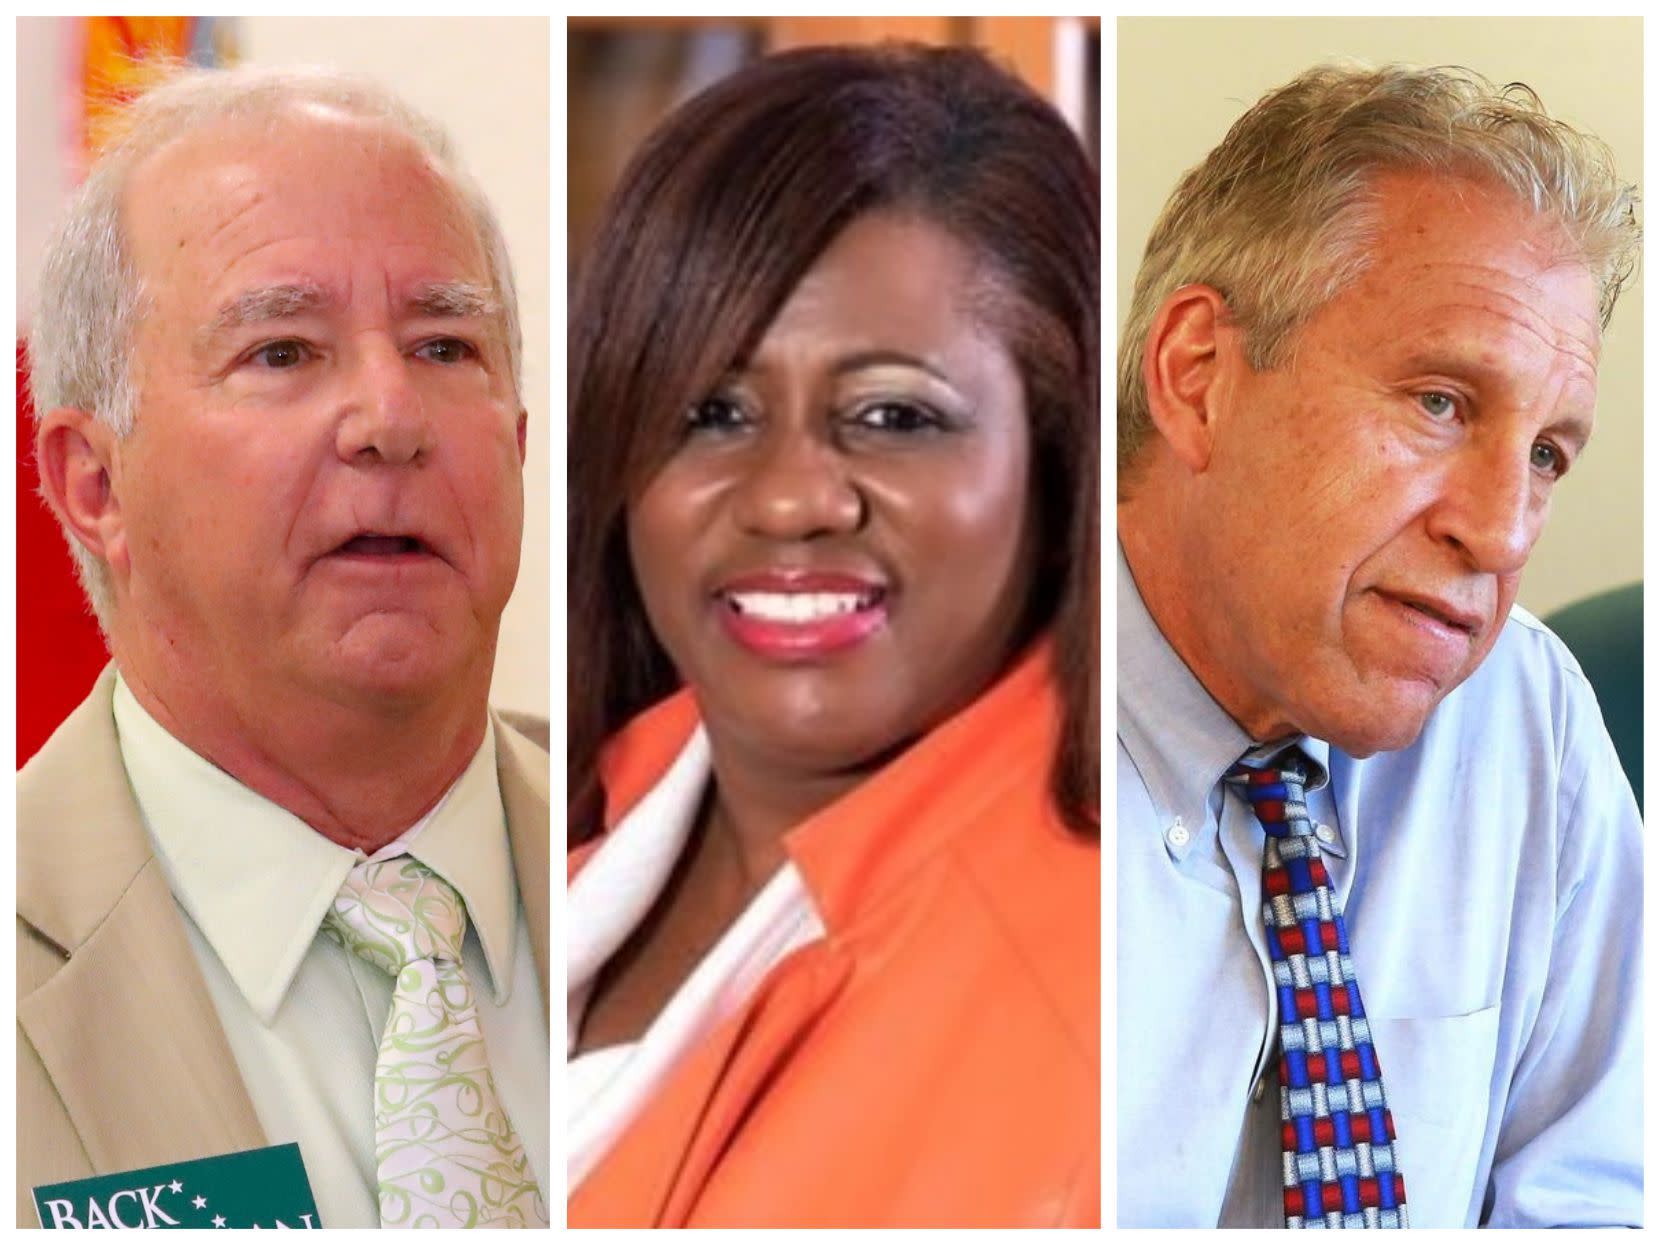 ‘Hated woman of color’ and ‘white Jewish guys’ in race for clerk